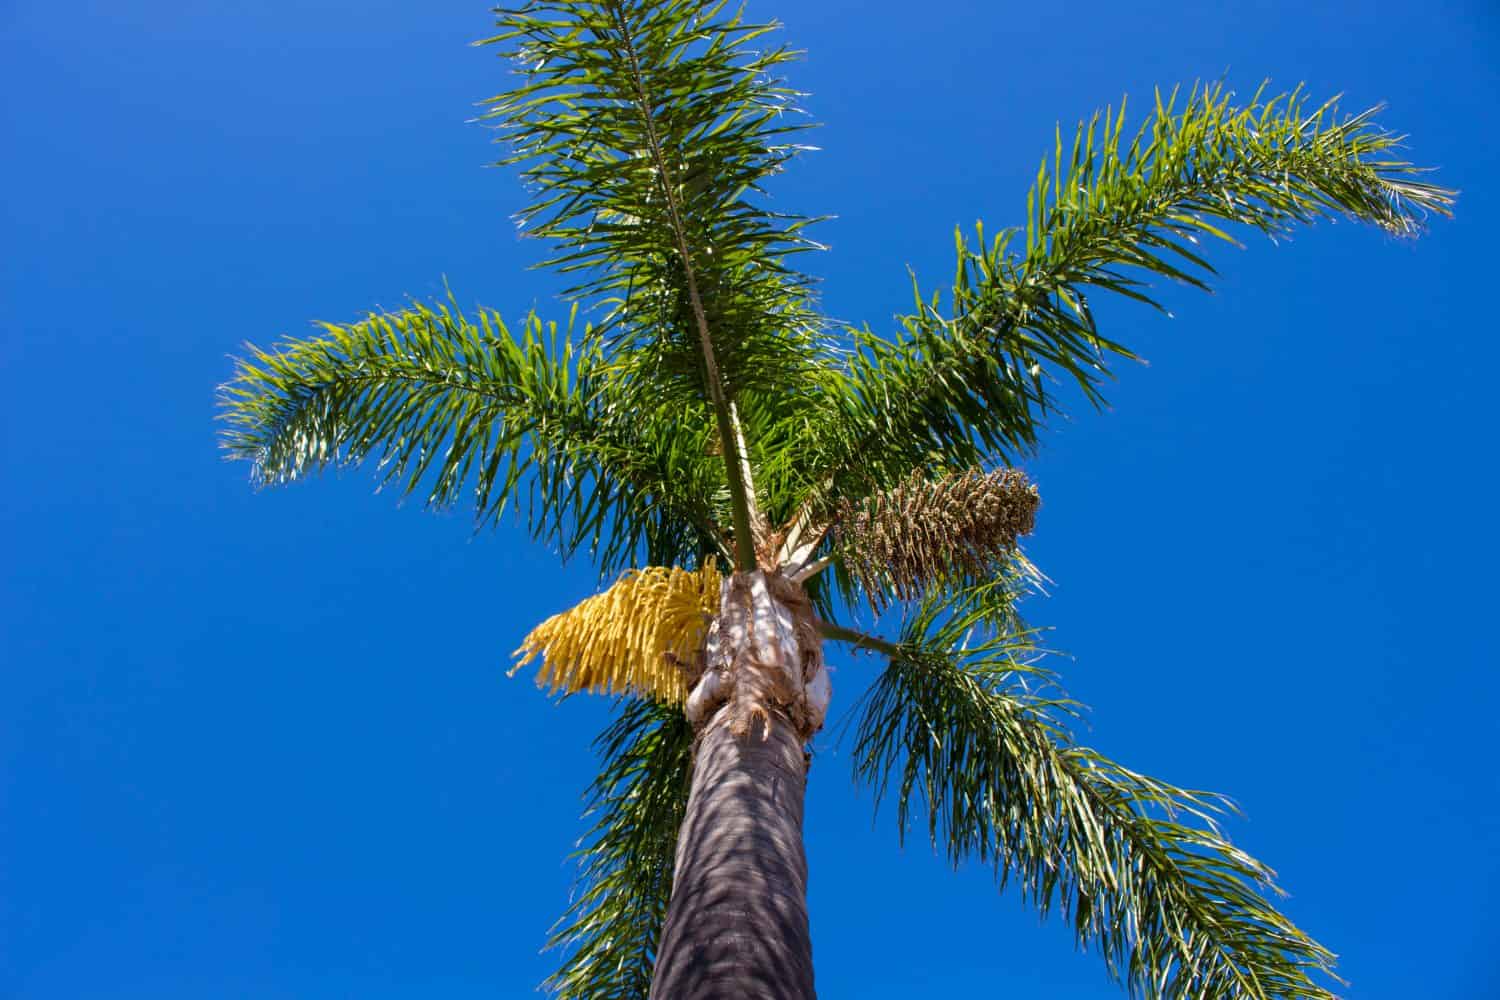 Tall graceful majestic Cocos plumosa Queen palm will soon be in flower with seed pods forming hanging down from its green crown in early summer being a favourite  decorative garden plant.